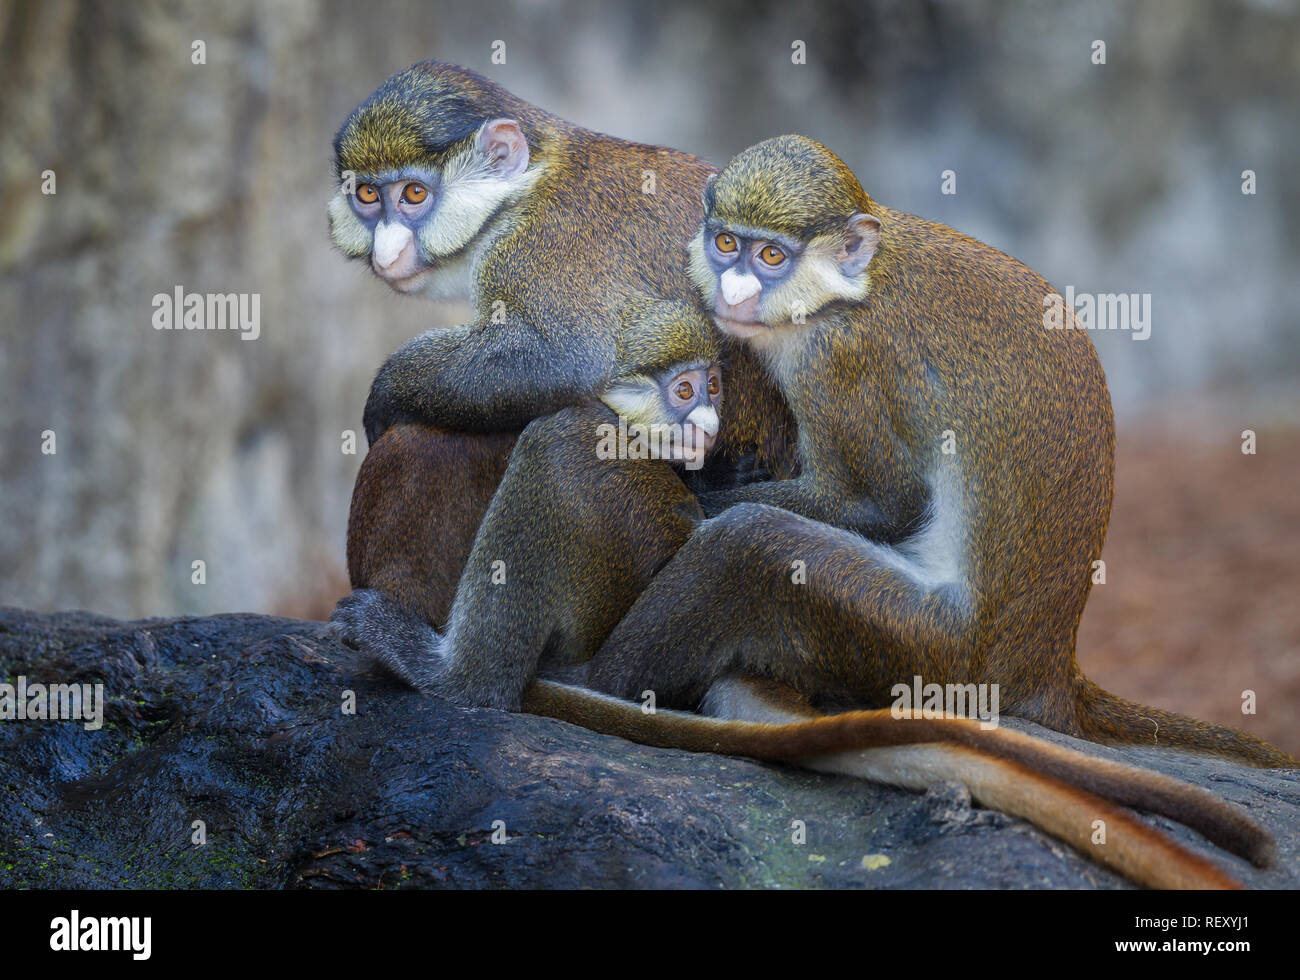 Red tailed Guenon monkey family in group hug Stock Photo